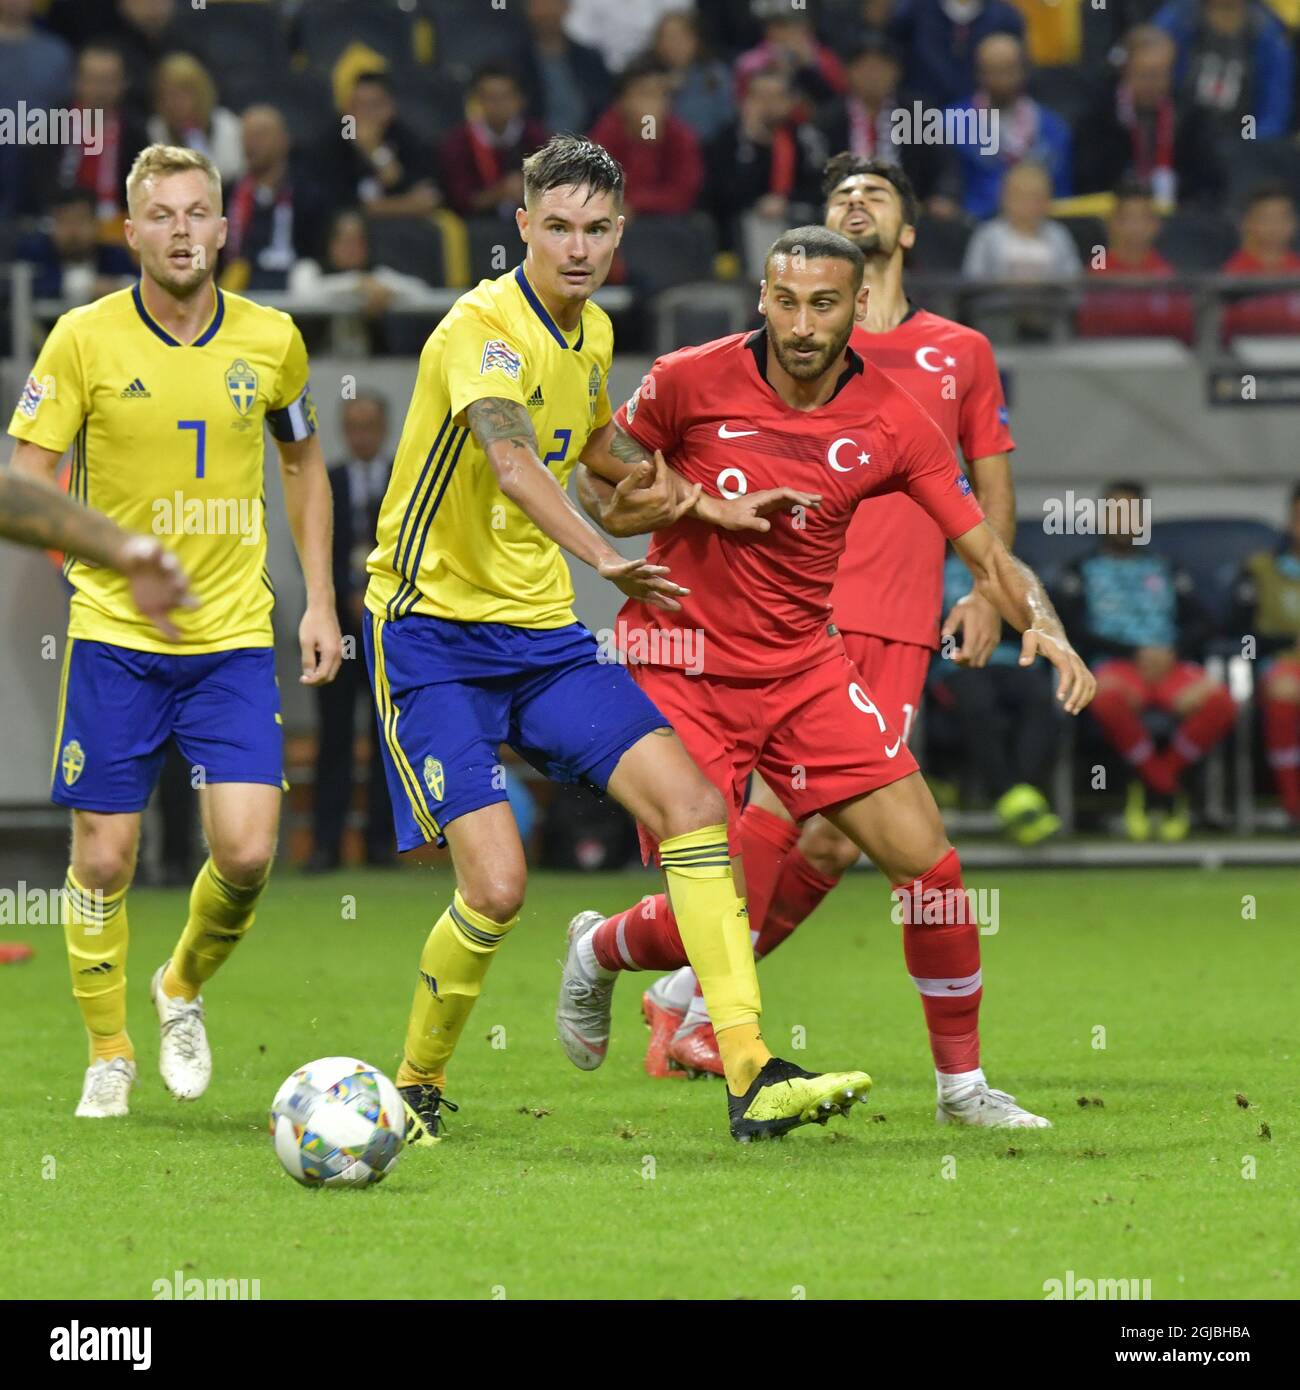 Sweden's Mikael Lustig (2) fights for the ball with Turkey's Cenk Tosun during the UEFA Nations League, league B, group 2, soccer match between Sweden and Turkey at Friends Arena in Solna, Stockholm, Sweden, on Sept. 10, 2018. Photo: Jonas Ekstromer / TT / code 10030  Stock Photo